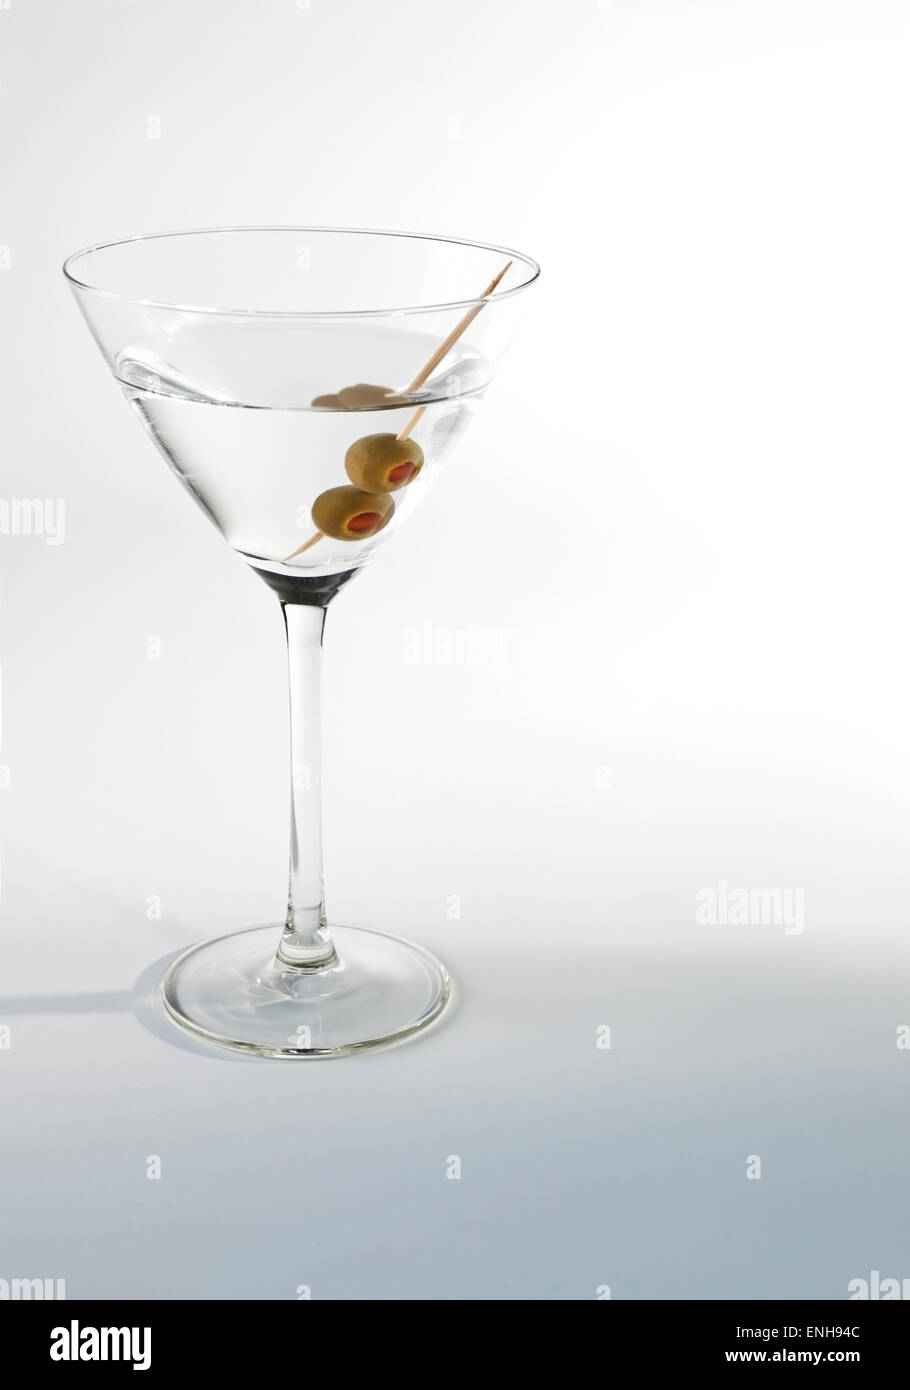 Martini Glass with a dry martini and two olives on white background Stock Photo